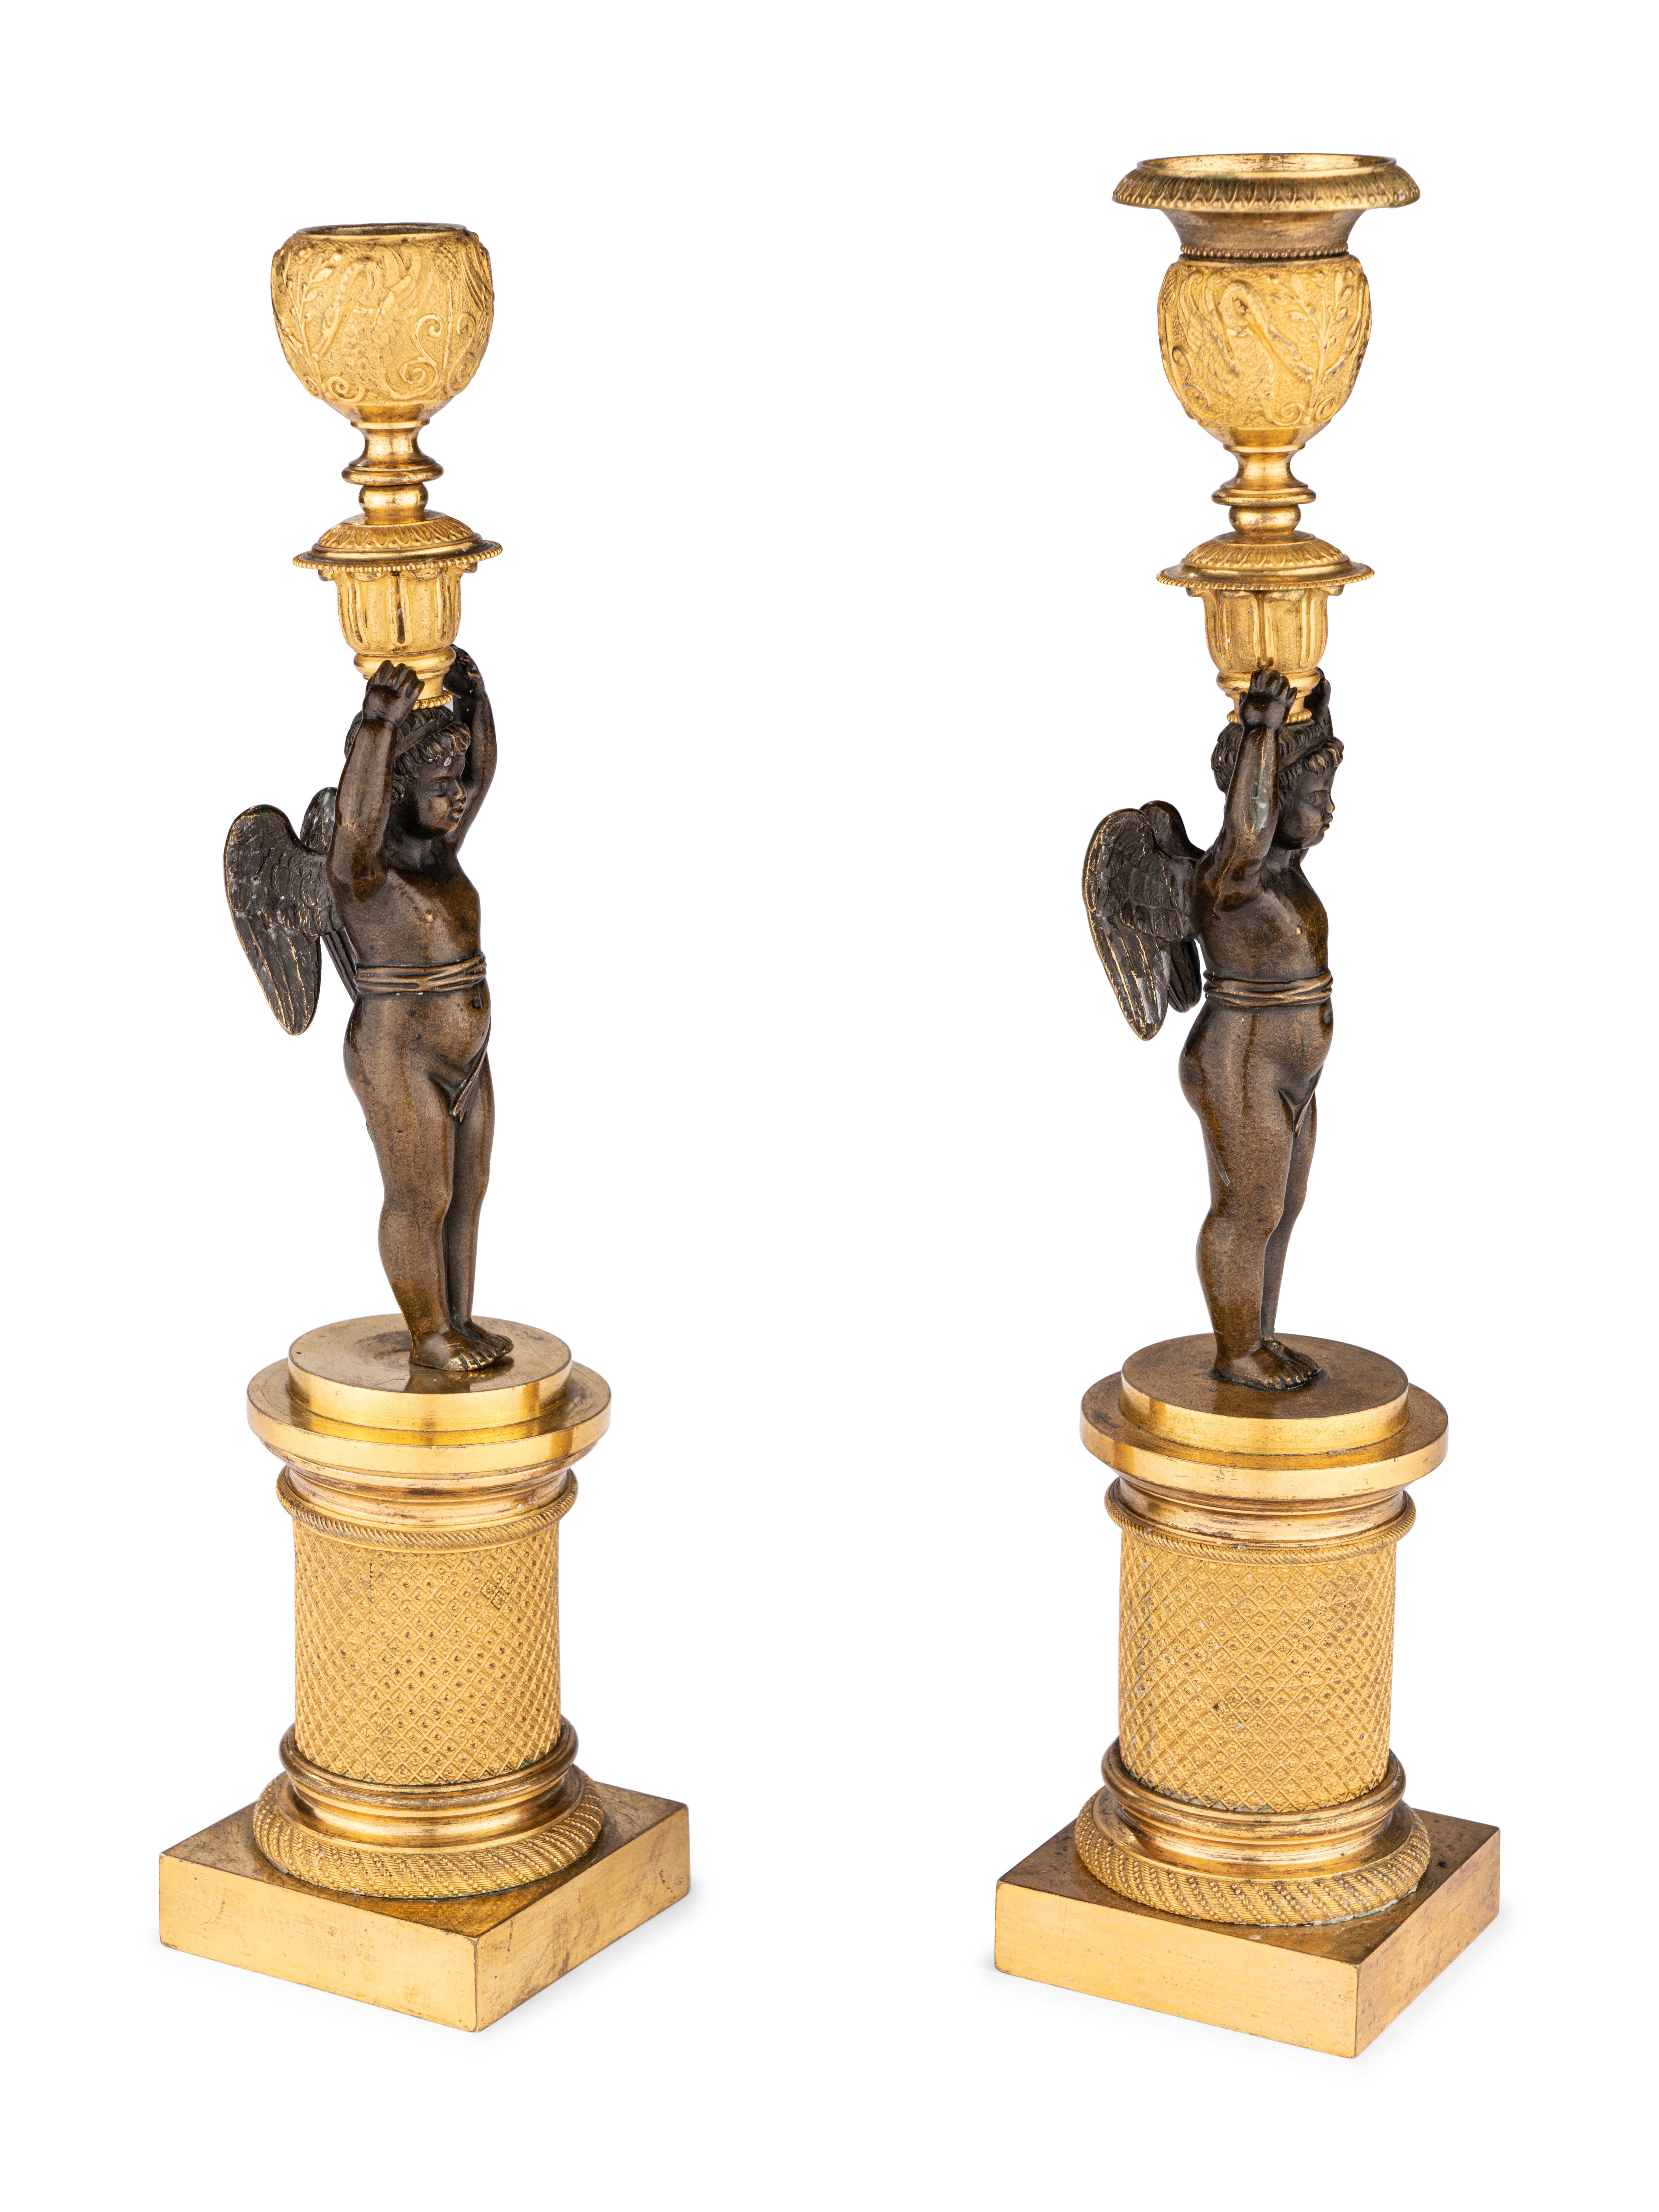 A Pair of Restauration Ormolu and Patinated Bronze Figural Candlesticks - Image 3 of 6